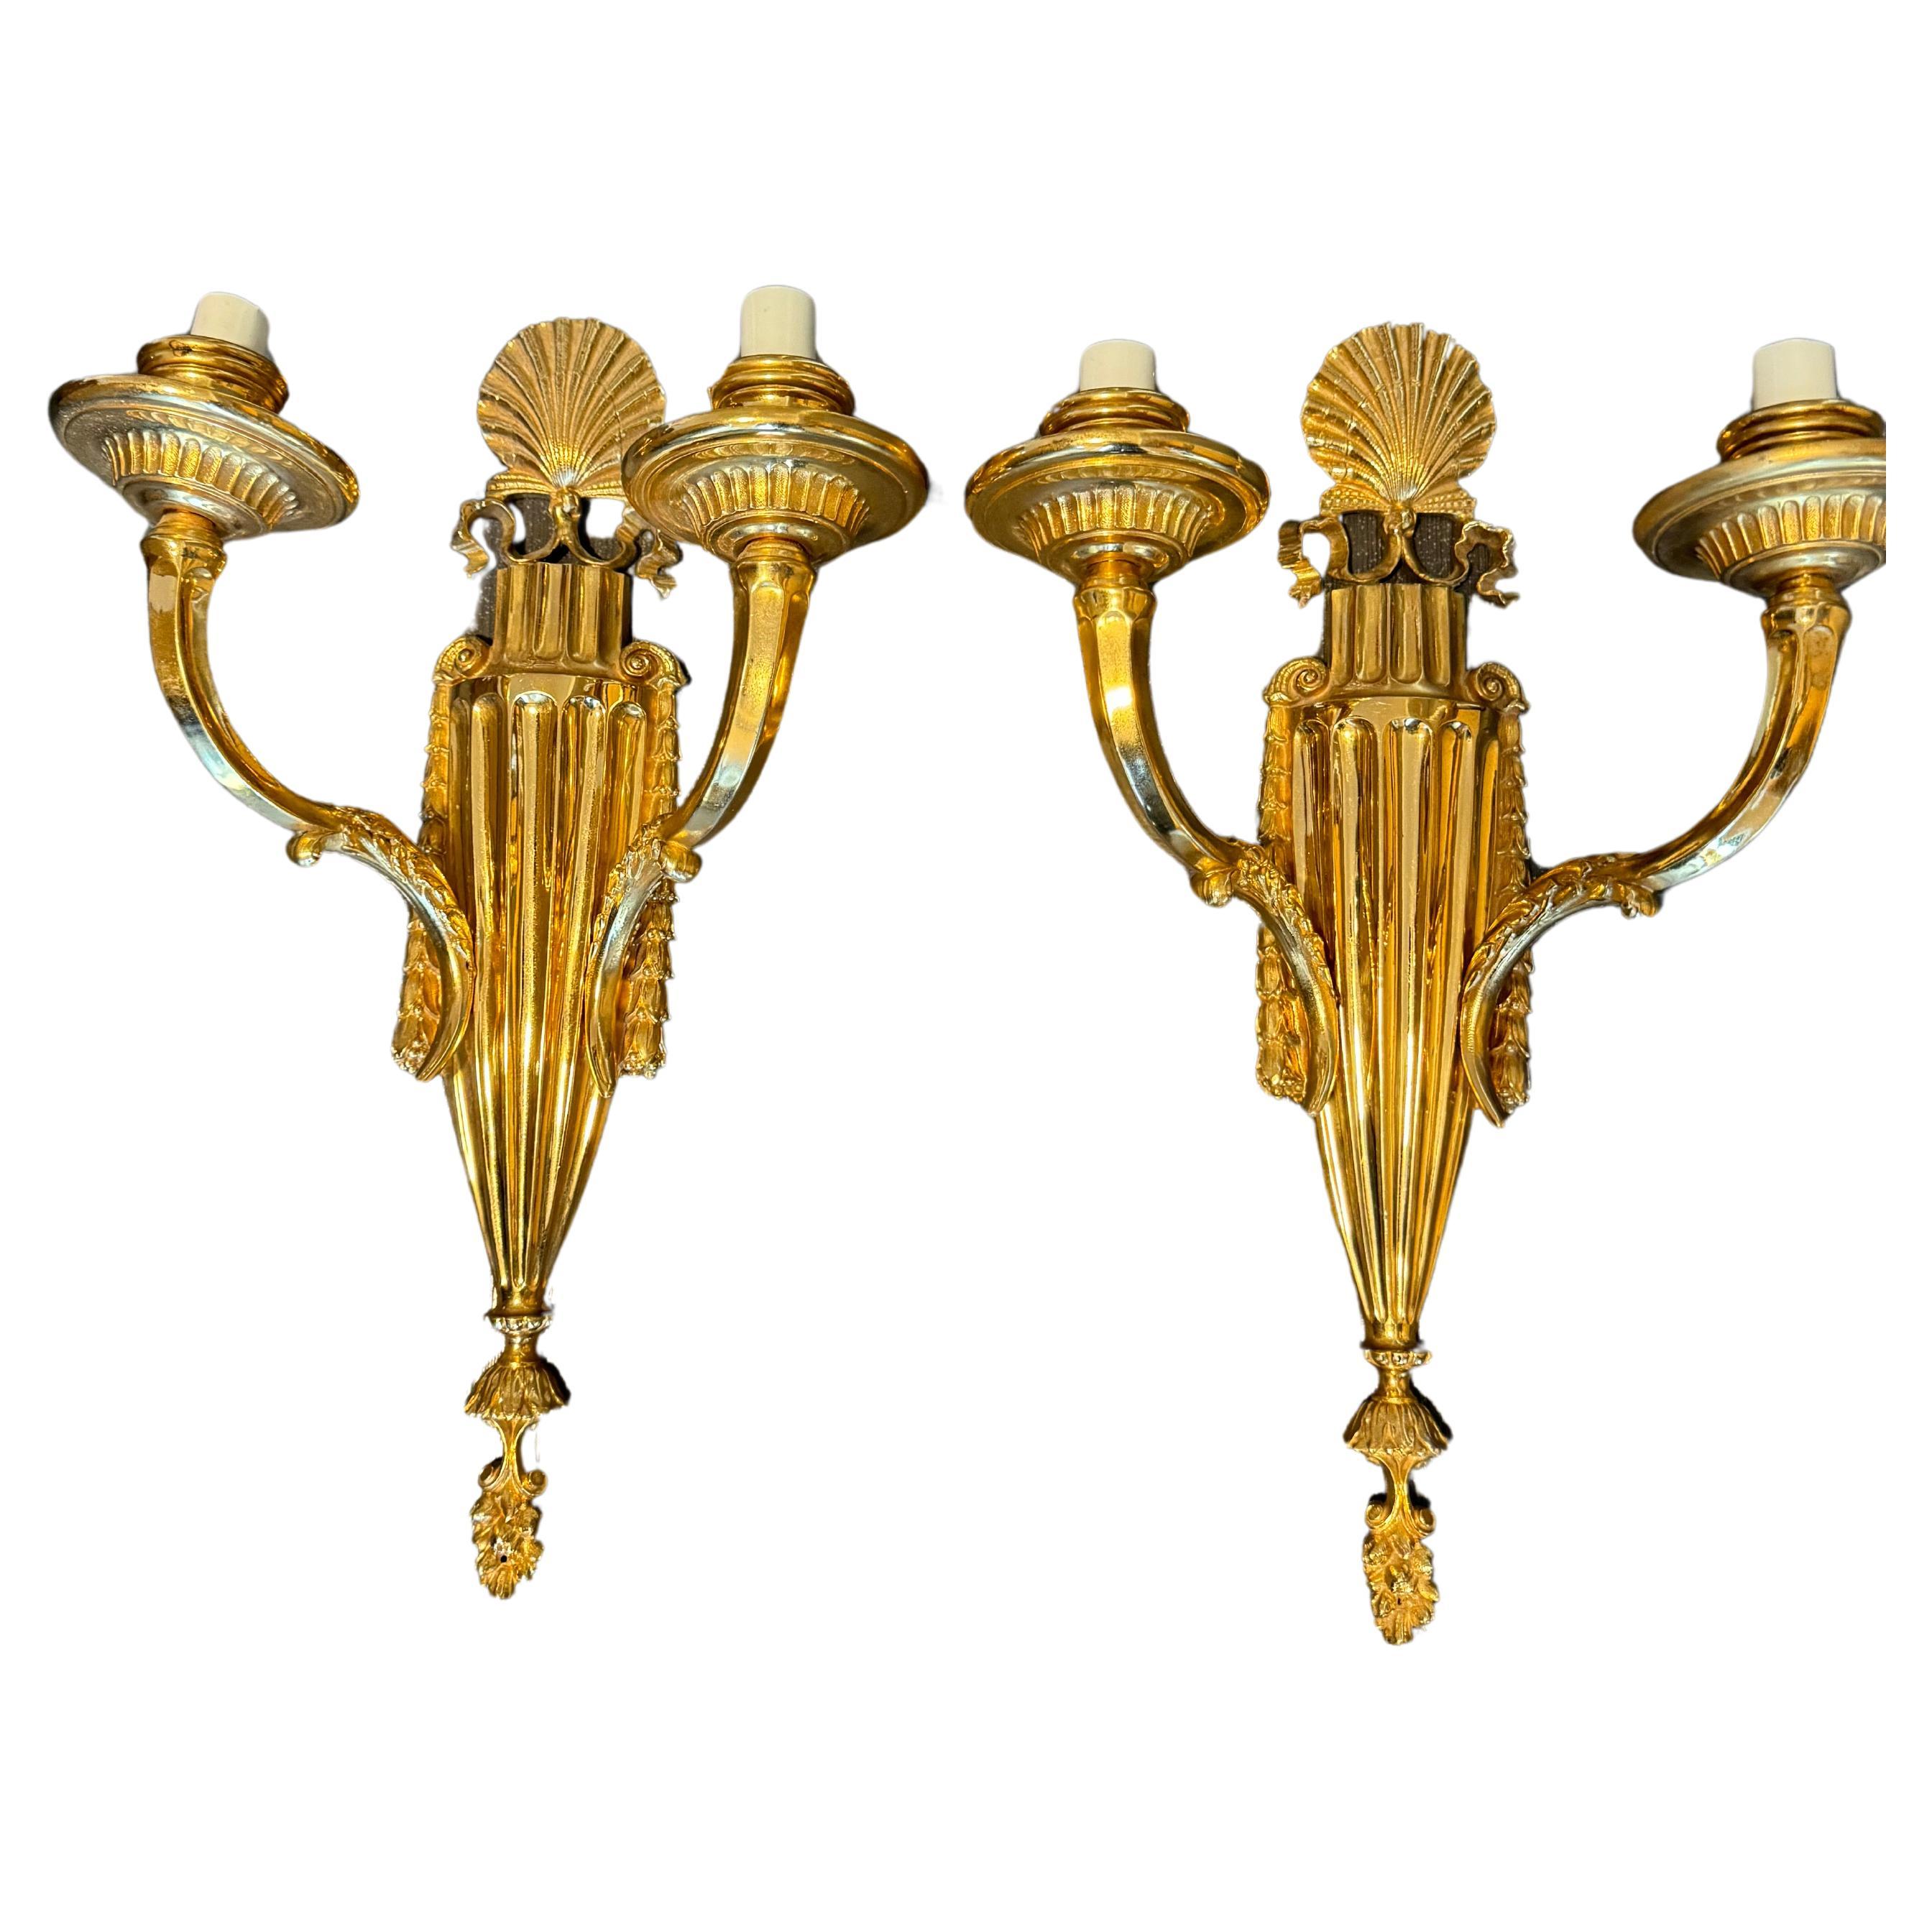 A pair of circa 1900’s Caldwell double light sconces with shell design stop.